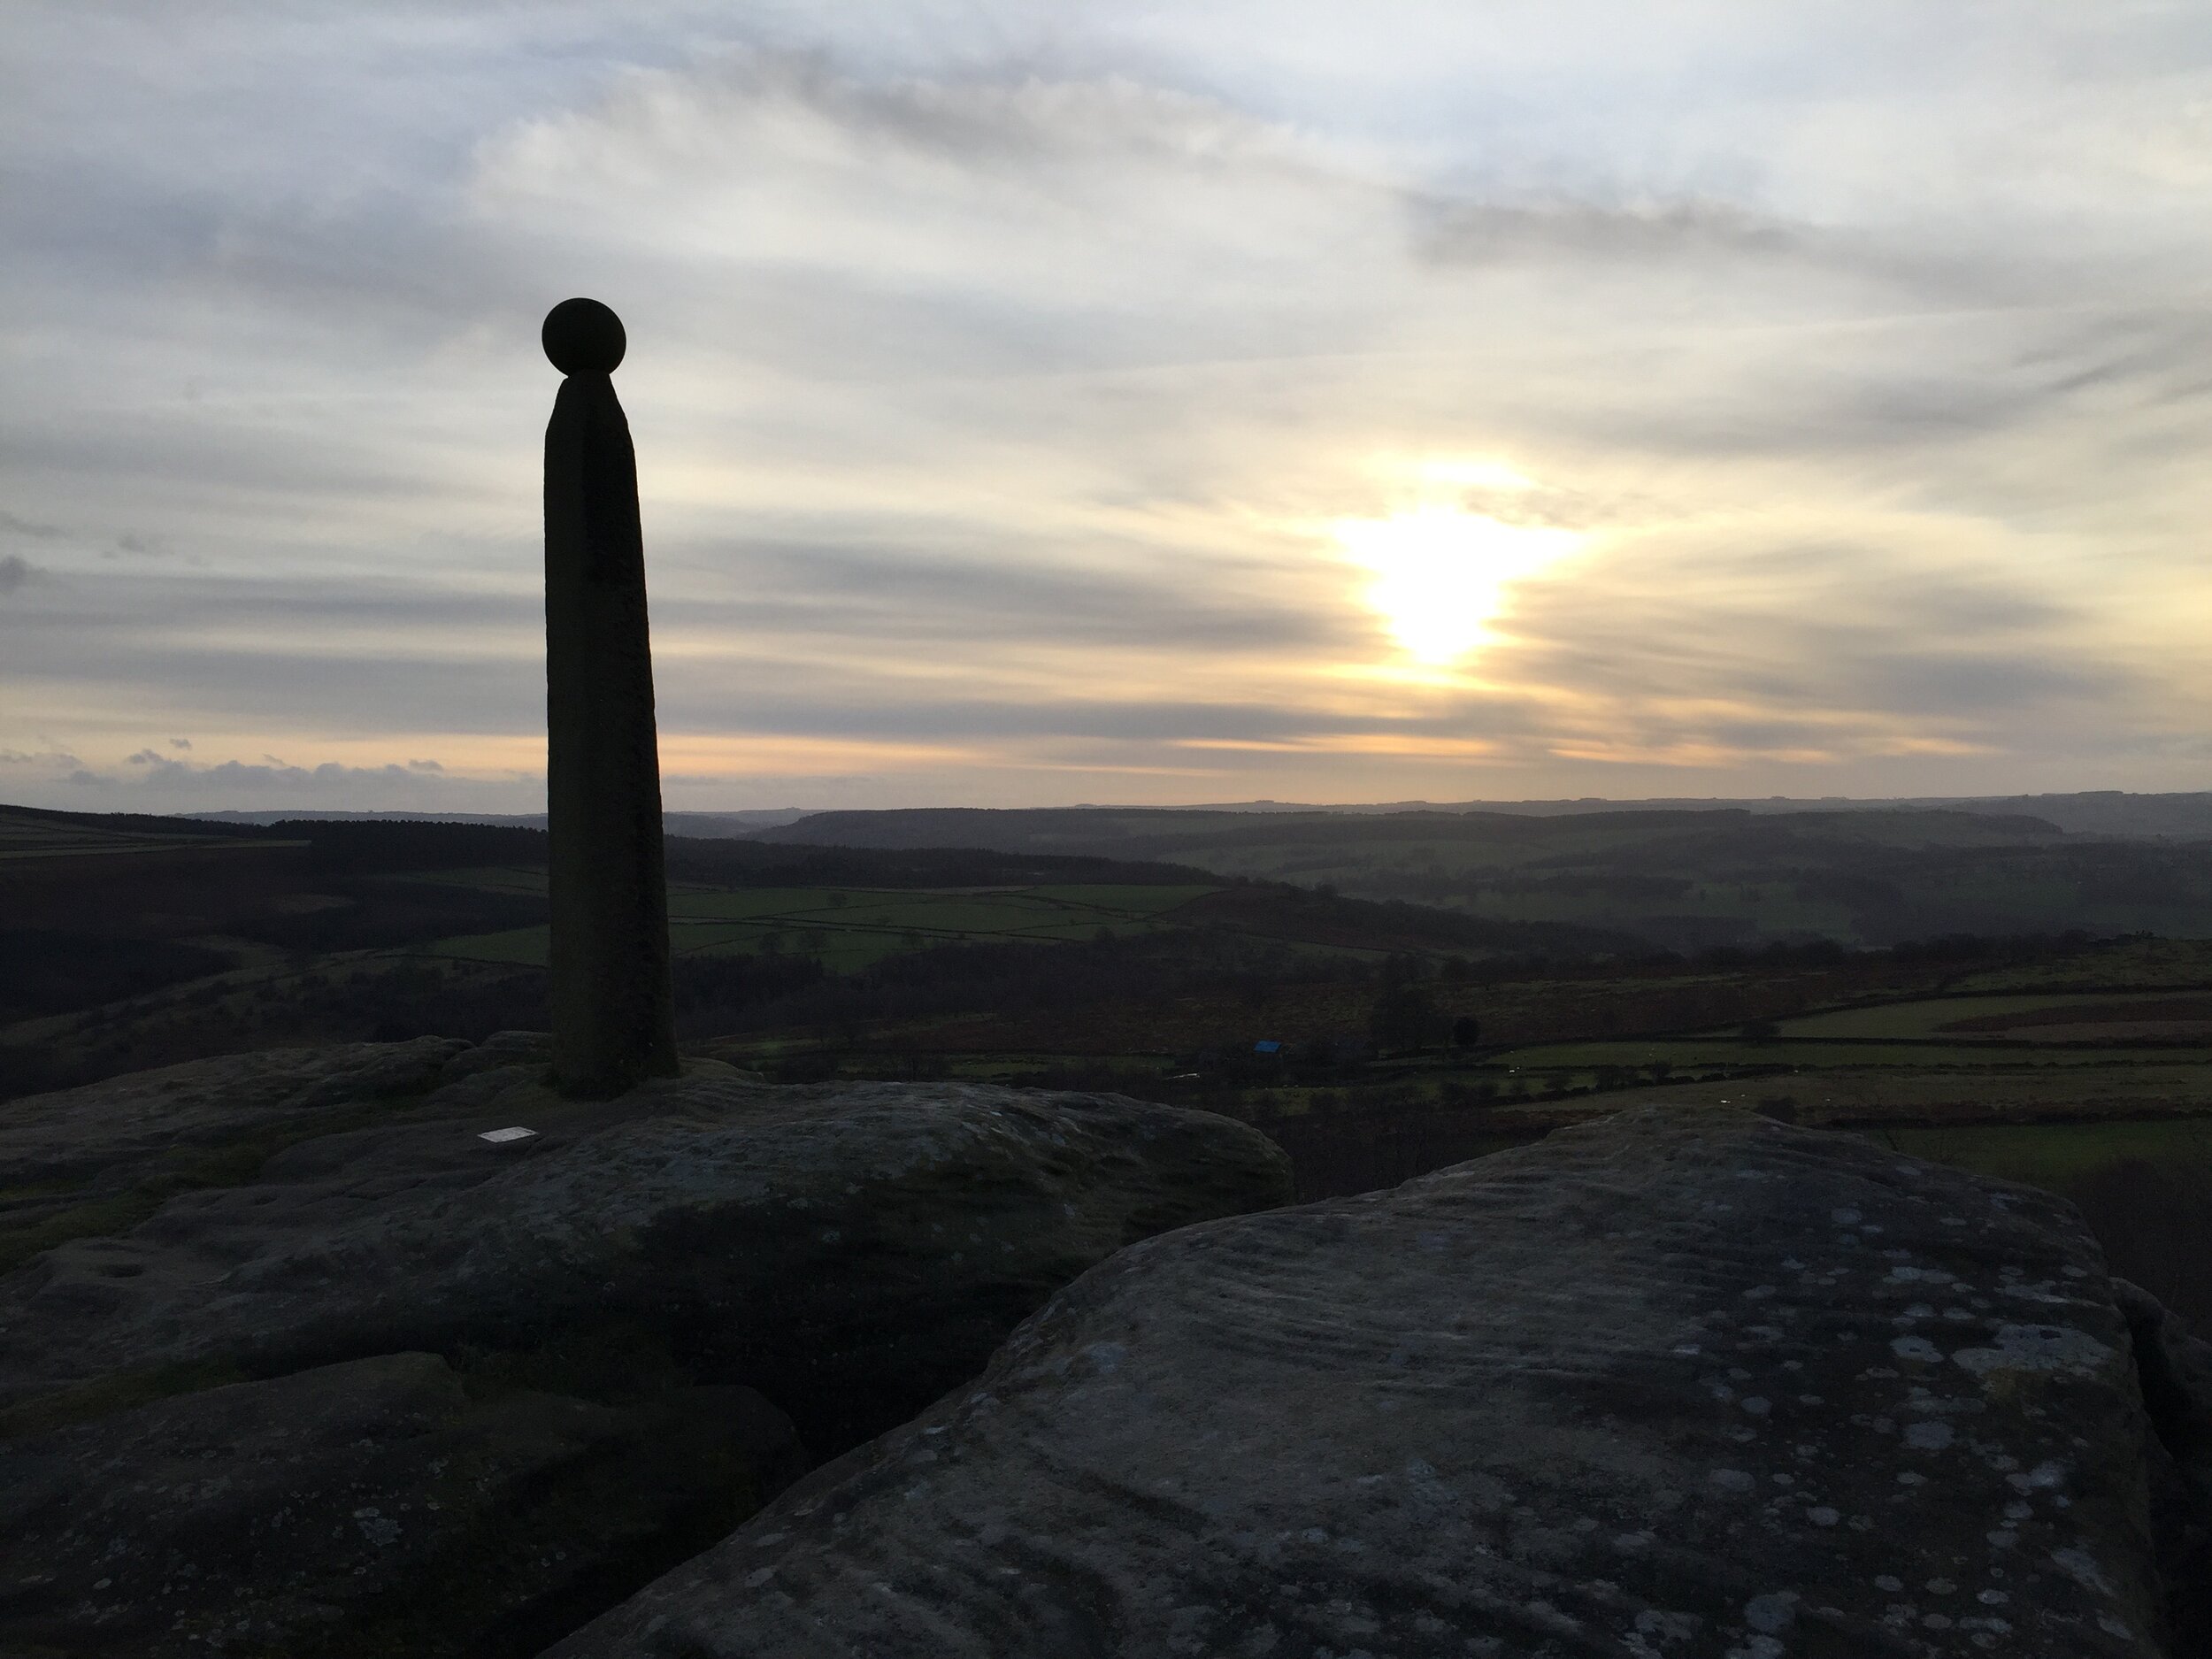  The monument overlooking the Edge, with the beginnings of a sunset in the sky. 